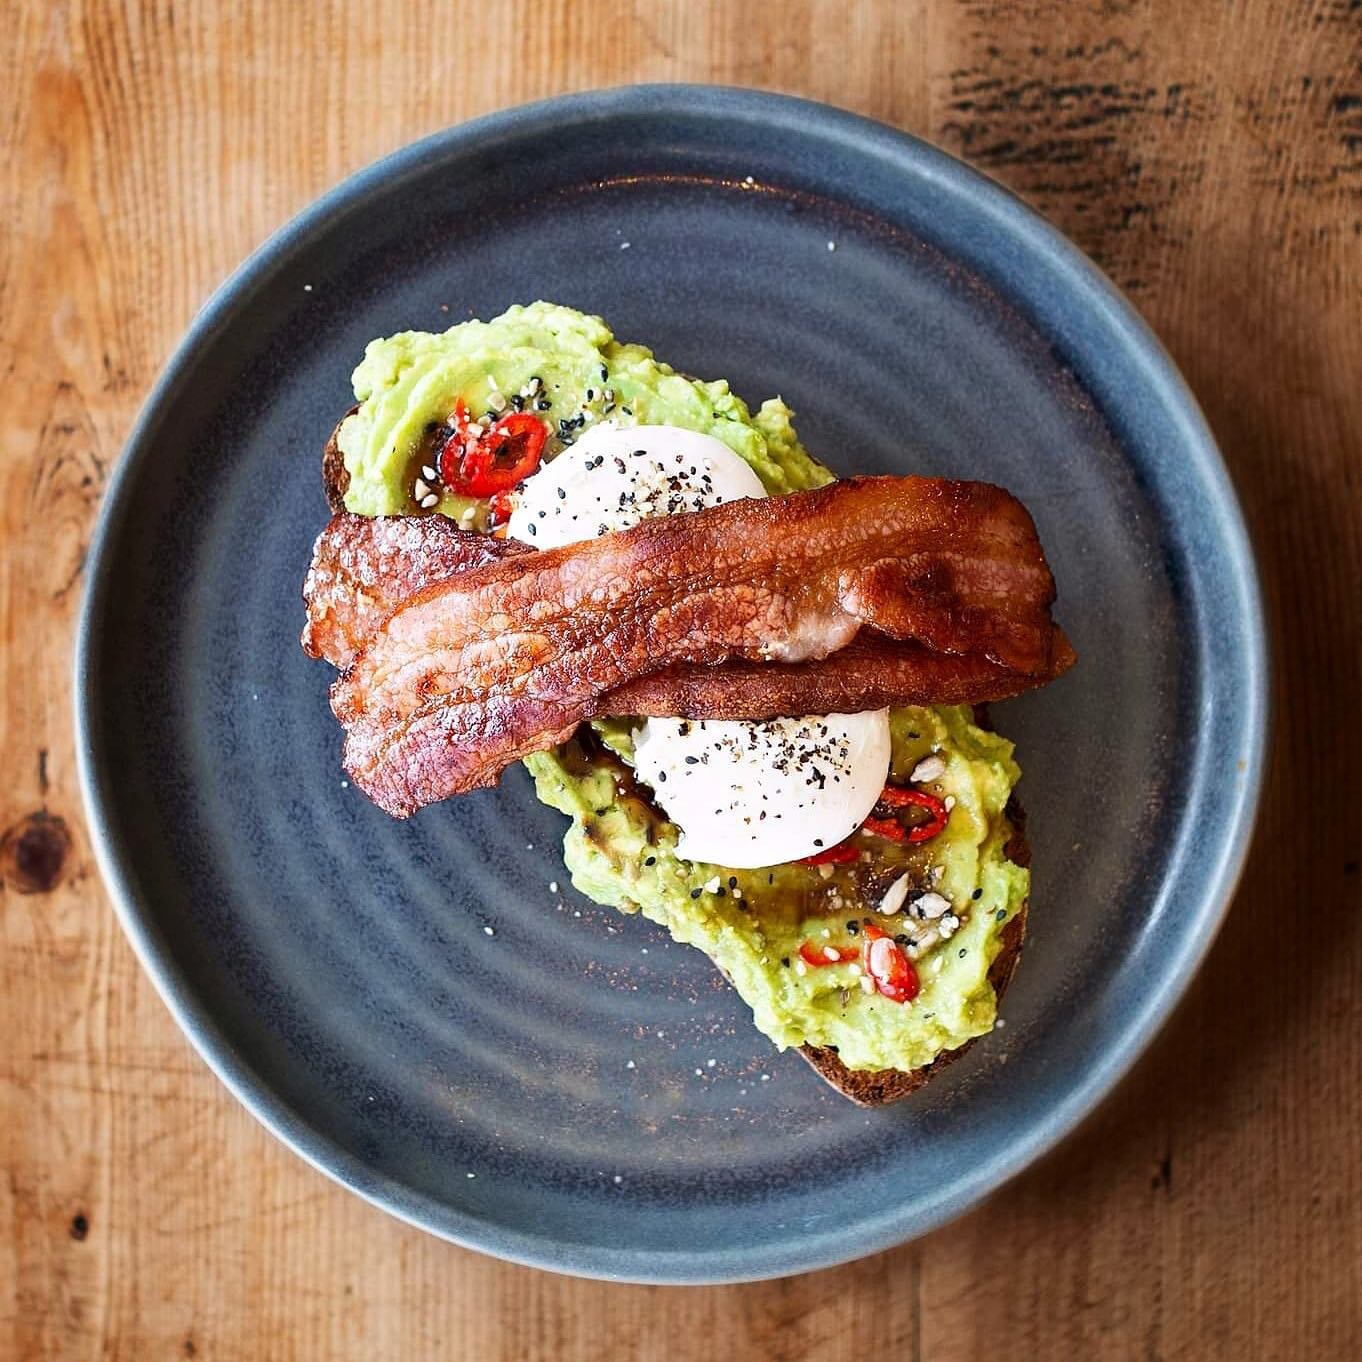 Can't go wrong with smashed avo 🥑

Our smashed avocado comes topped with pickled chillies, balsamic glaze and sunflower &amp; sesame dukkah. From there you can add anything you'd like! Like two poached @cacklebean_eggs and streaky @waghornesbutchers